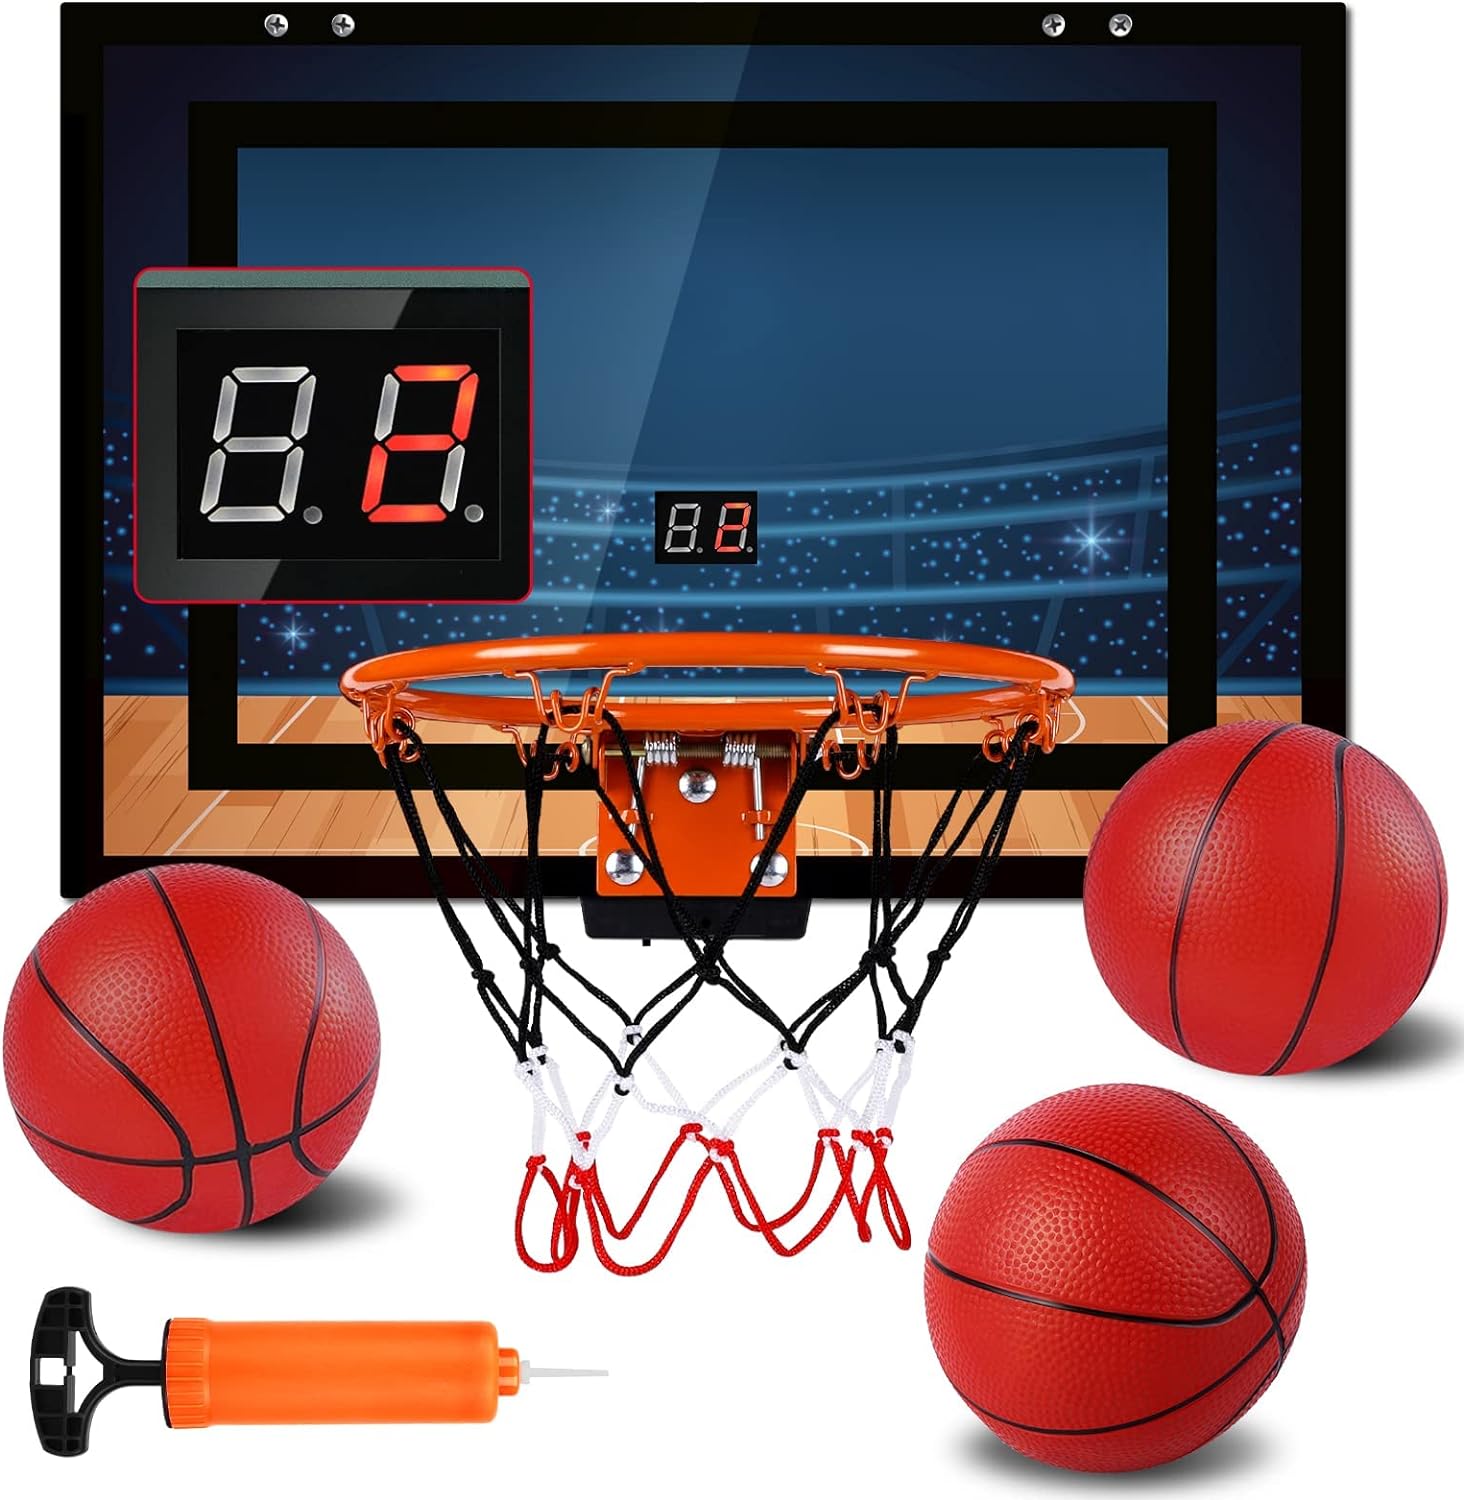 AOKESI Indoor Basketball Hoop for Room with Electronic Scoreboard - 17" x 12.5" Mini Basketball Hoop Over The Door Basketball Toys Gift for 5 6 7 8 9 10 11 12 Year Old Boys, Men and Adults